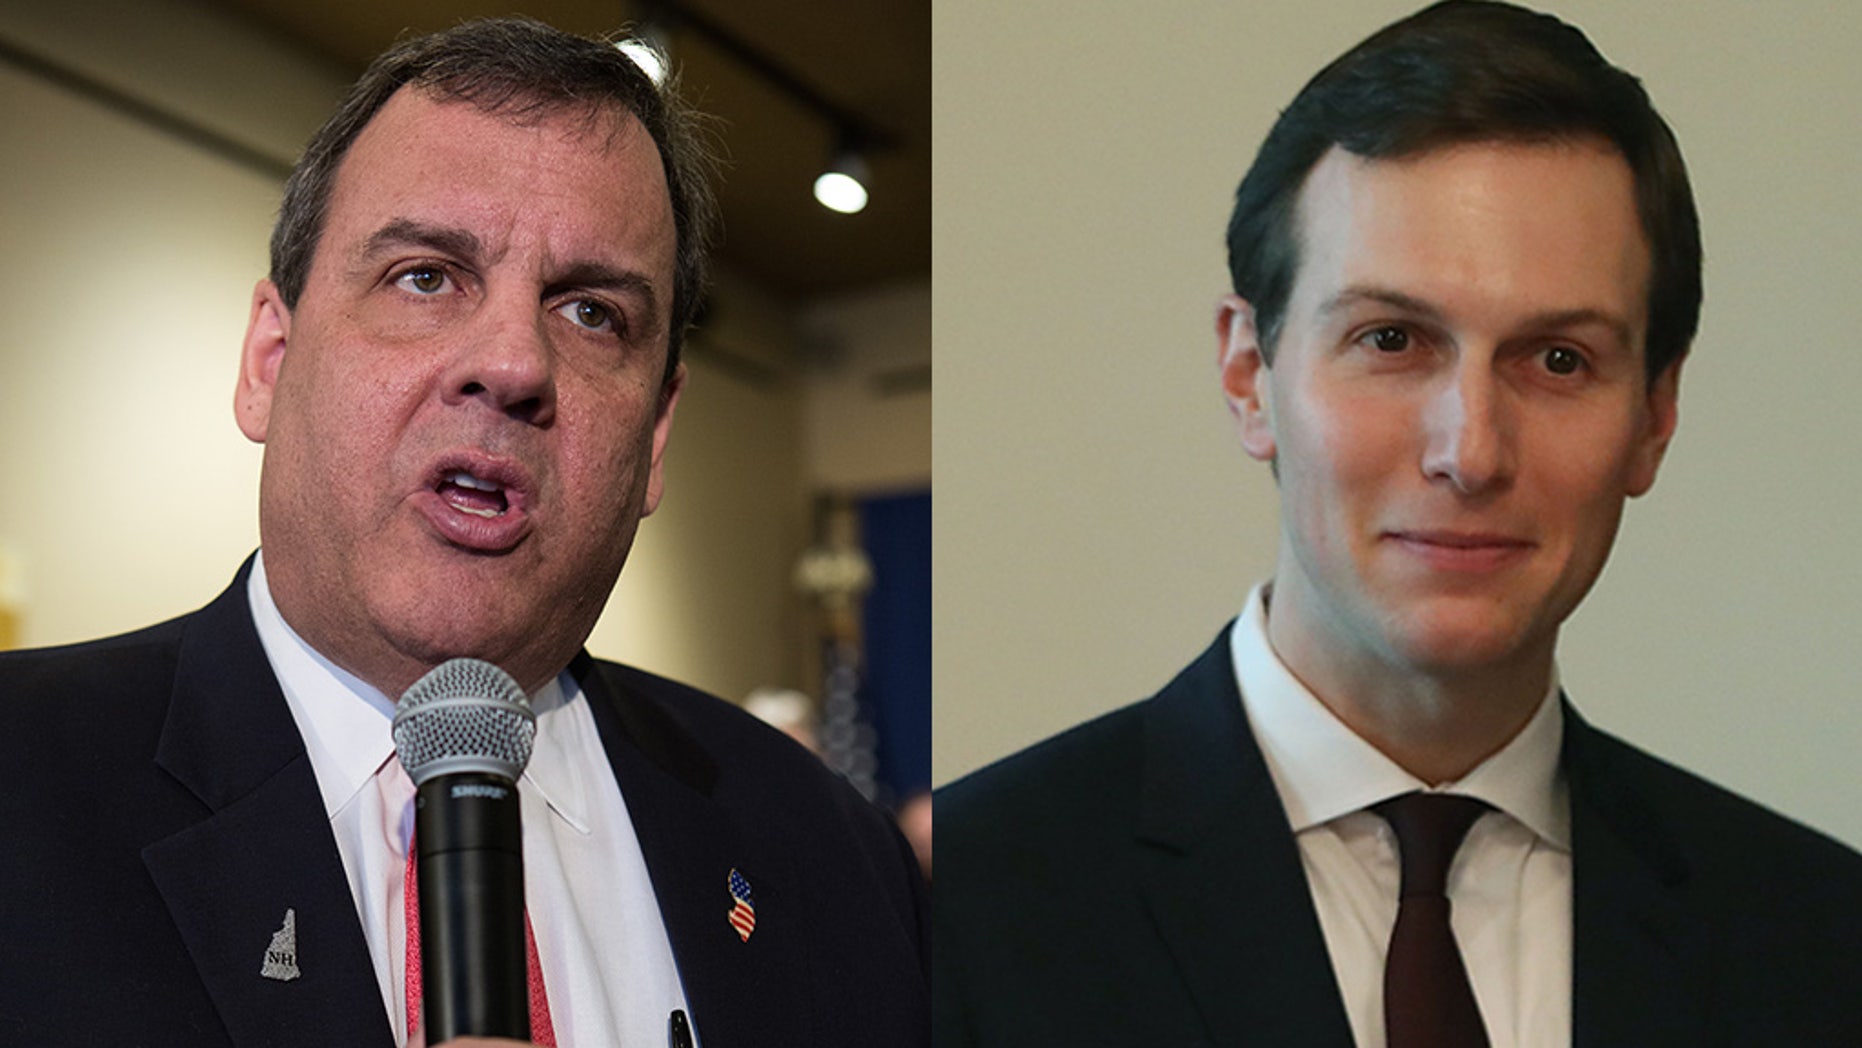 Chris Christie, in new book, accuses Jared Kushner of political 